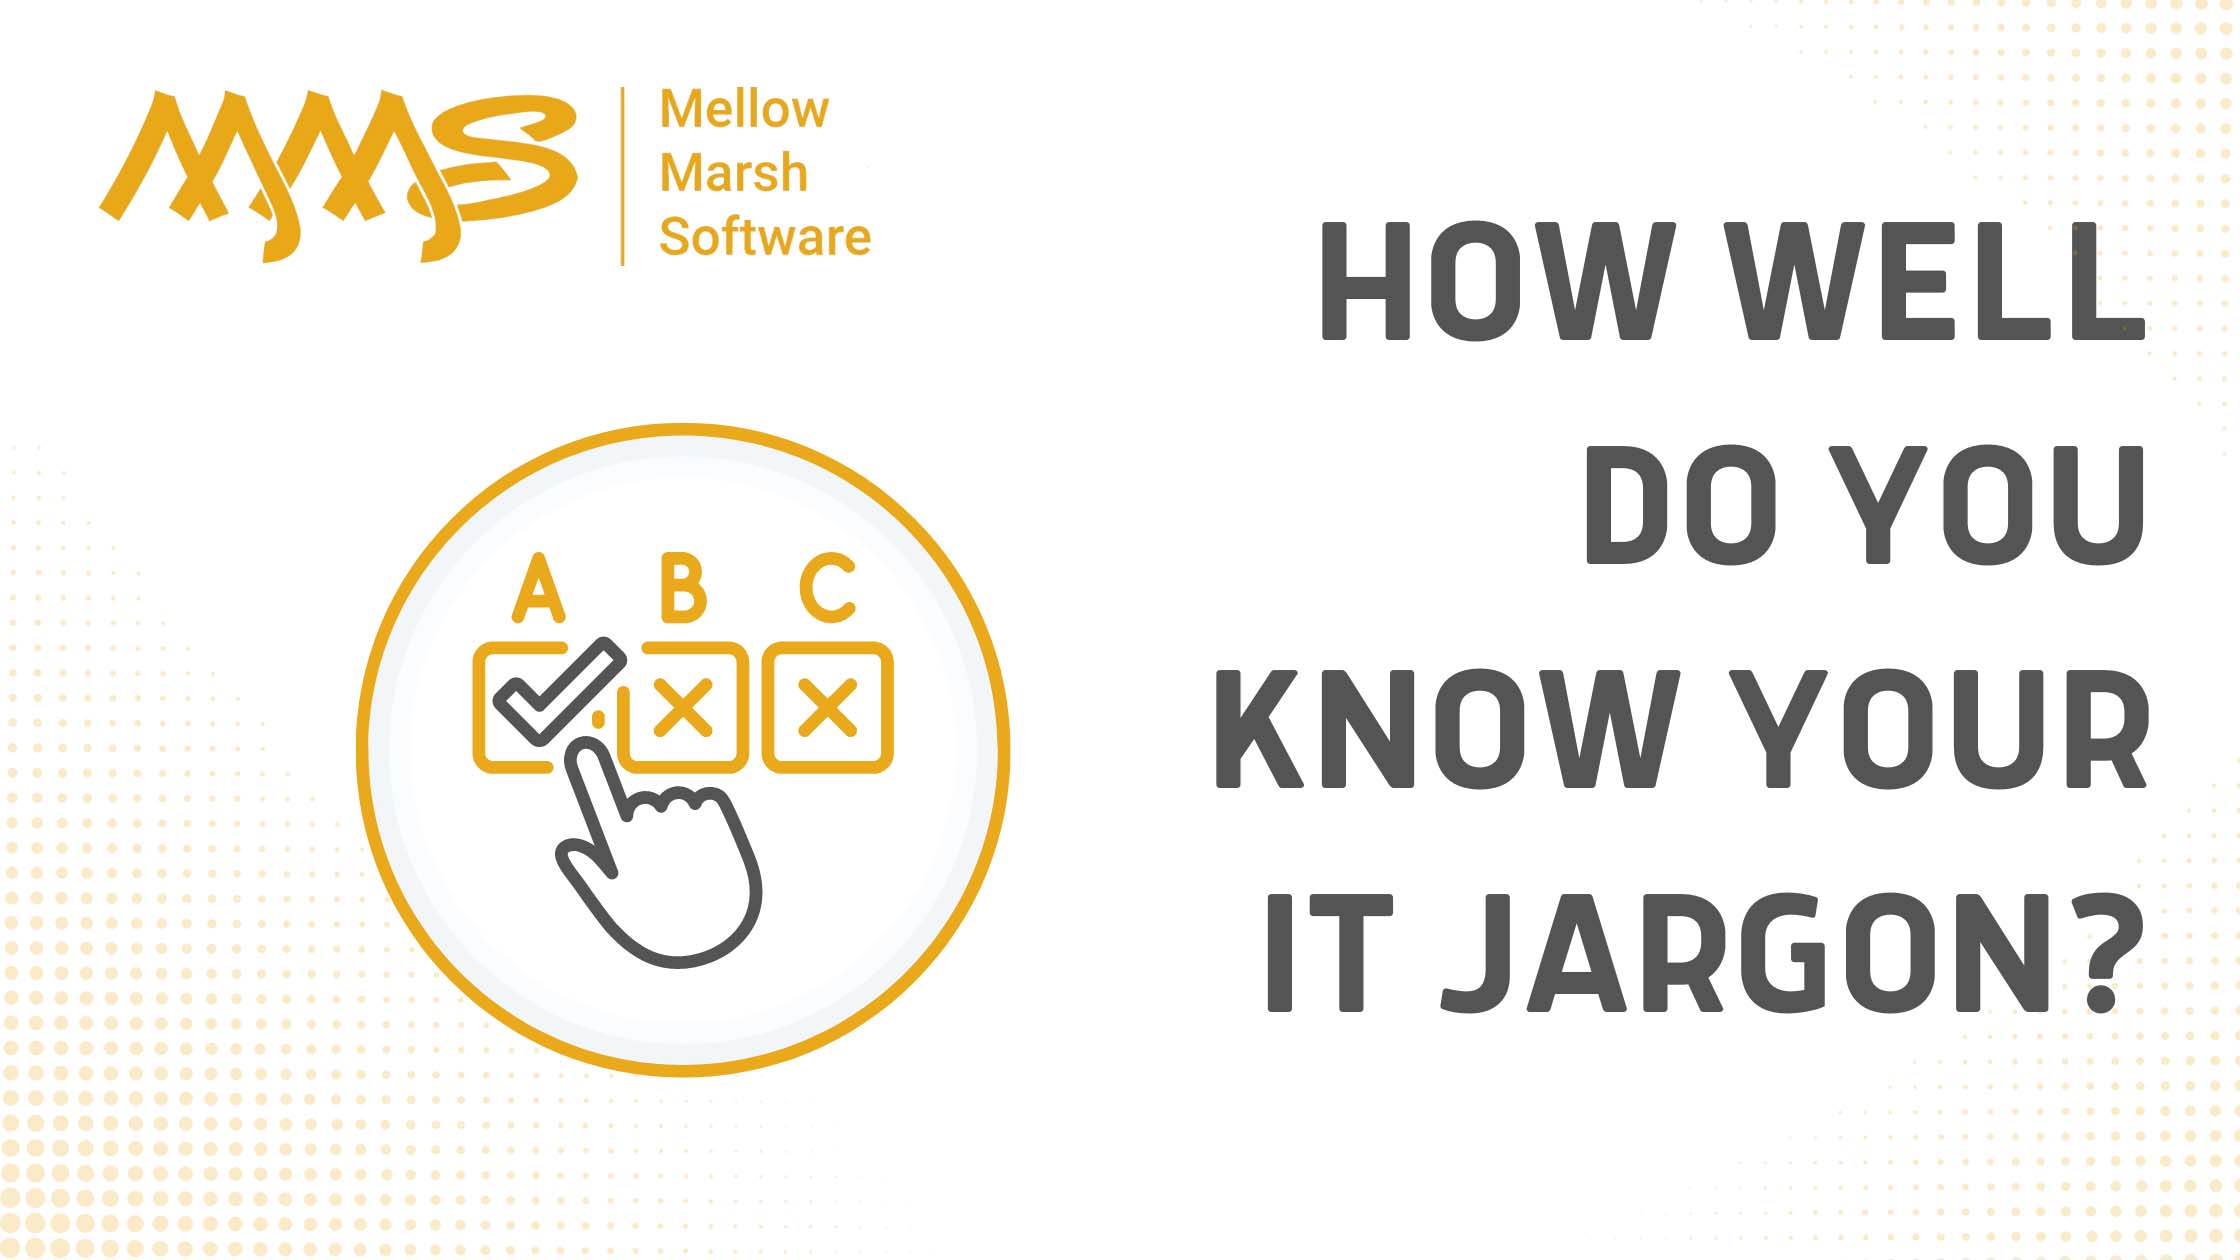 Test your IT Jargon Knowledge